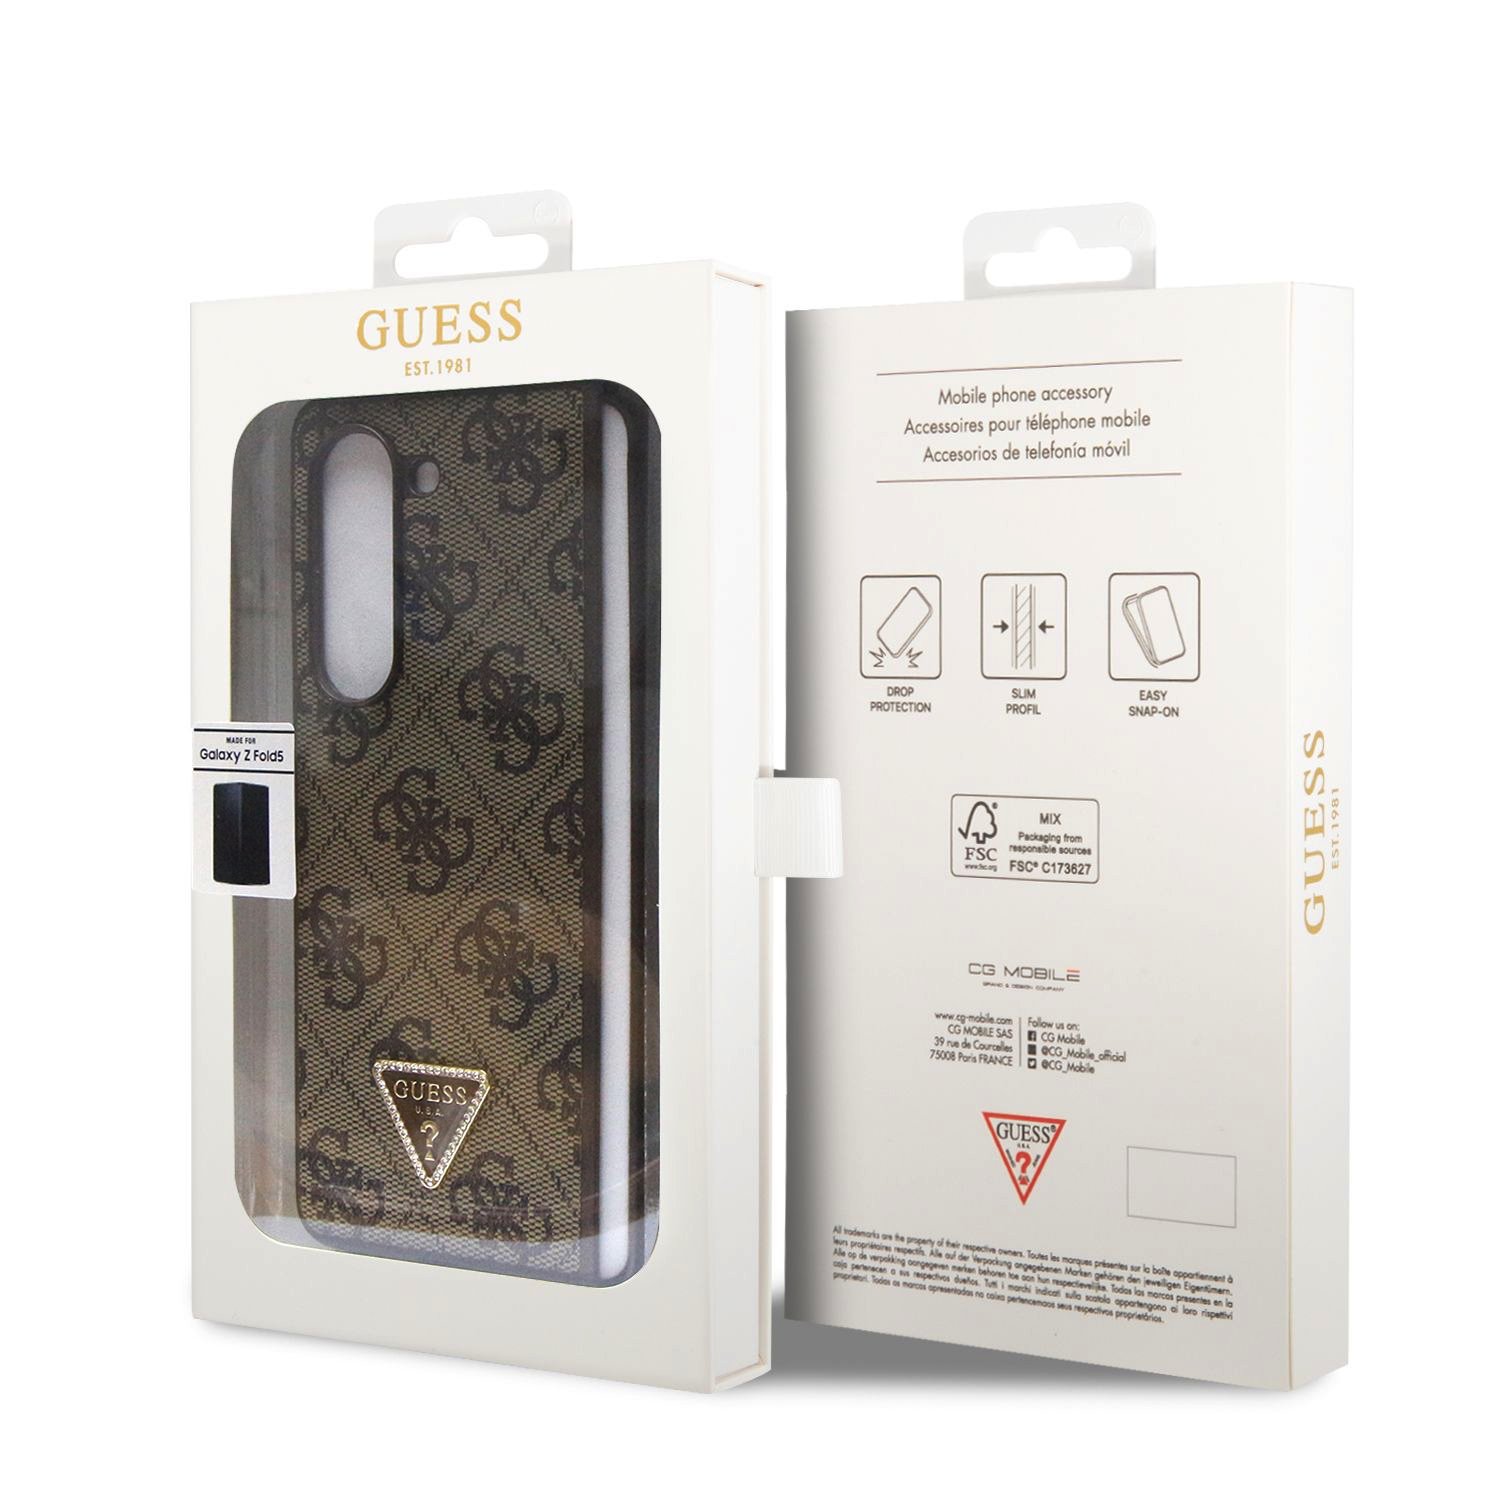 Guess Leather Triangle Case Galaxy Z Fold 5, Brown